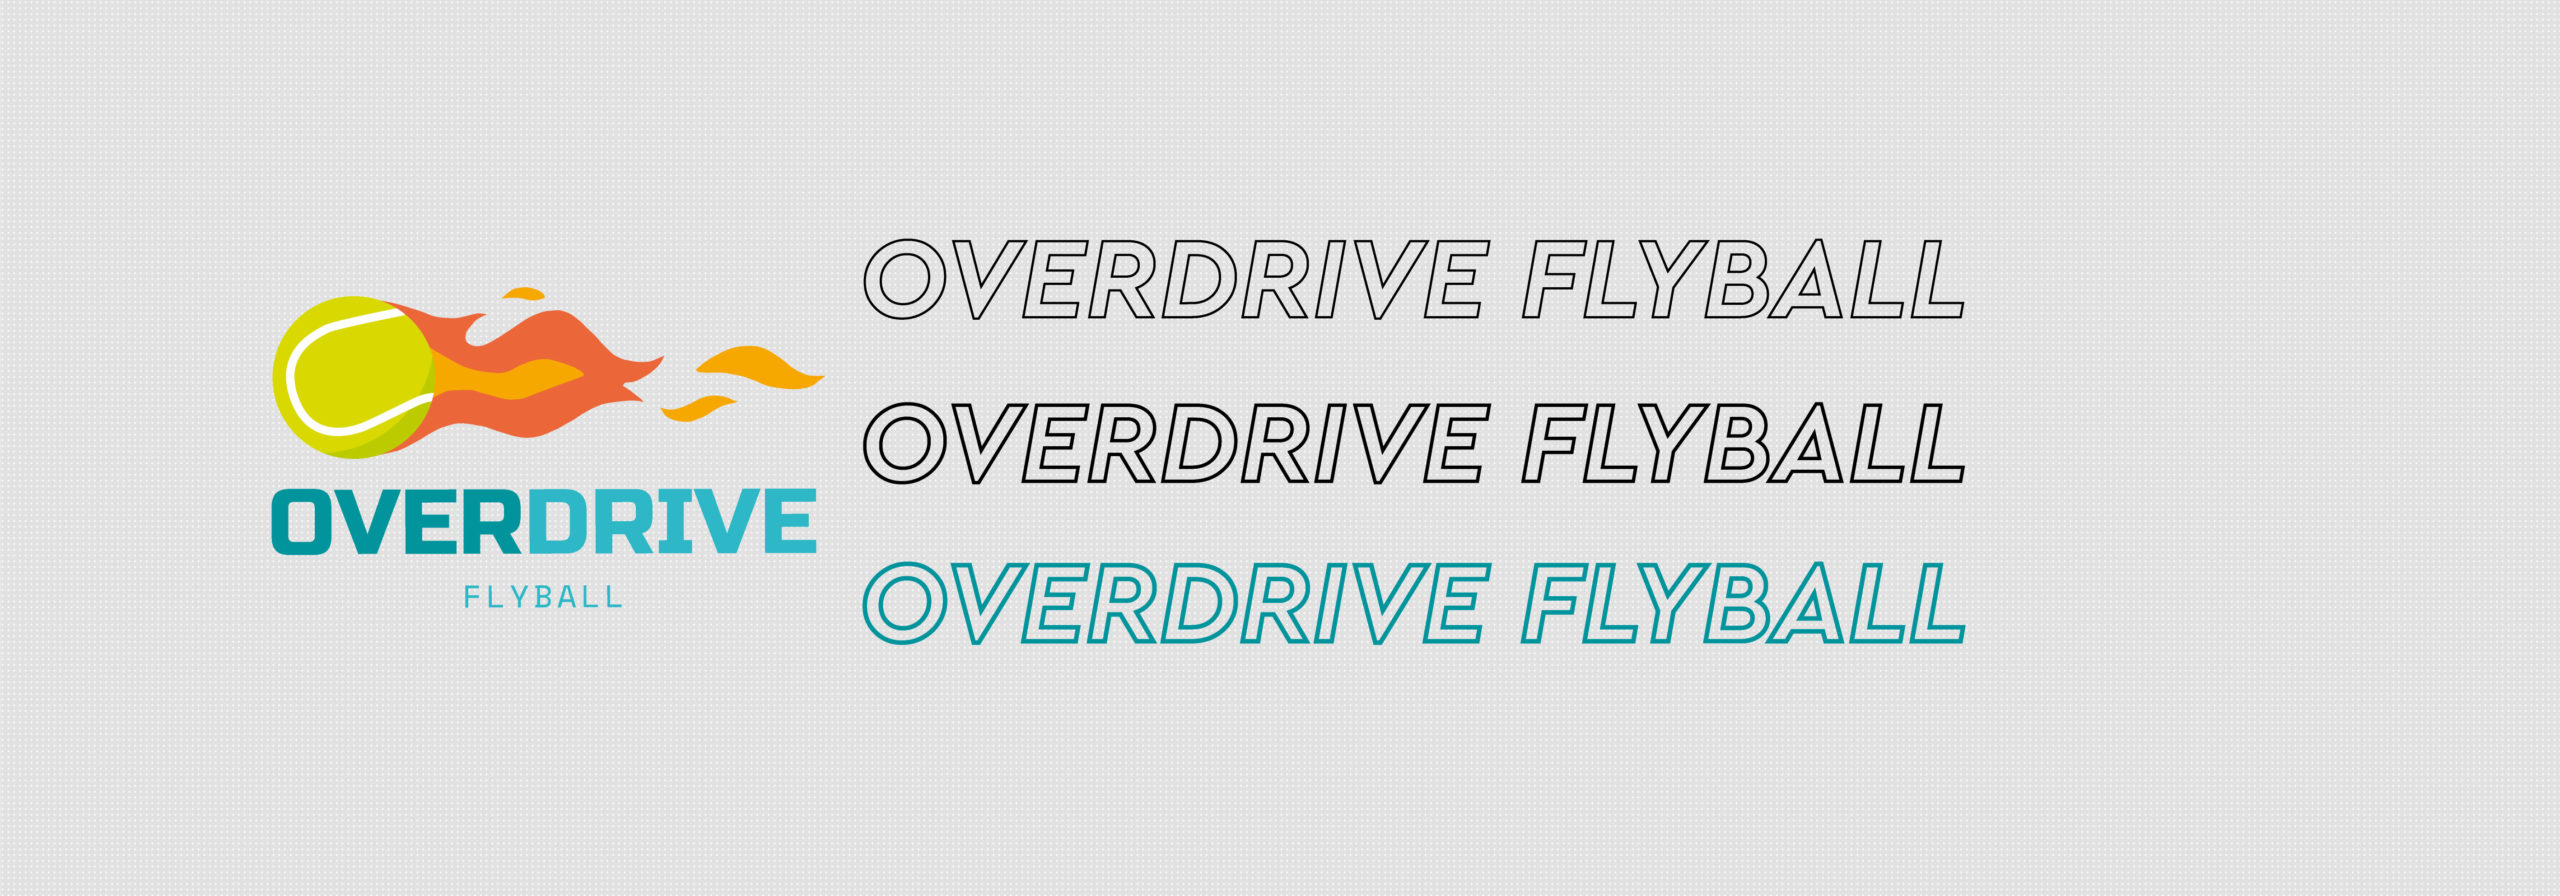 Overdrive Flyball Club